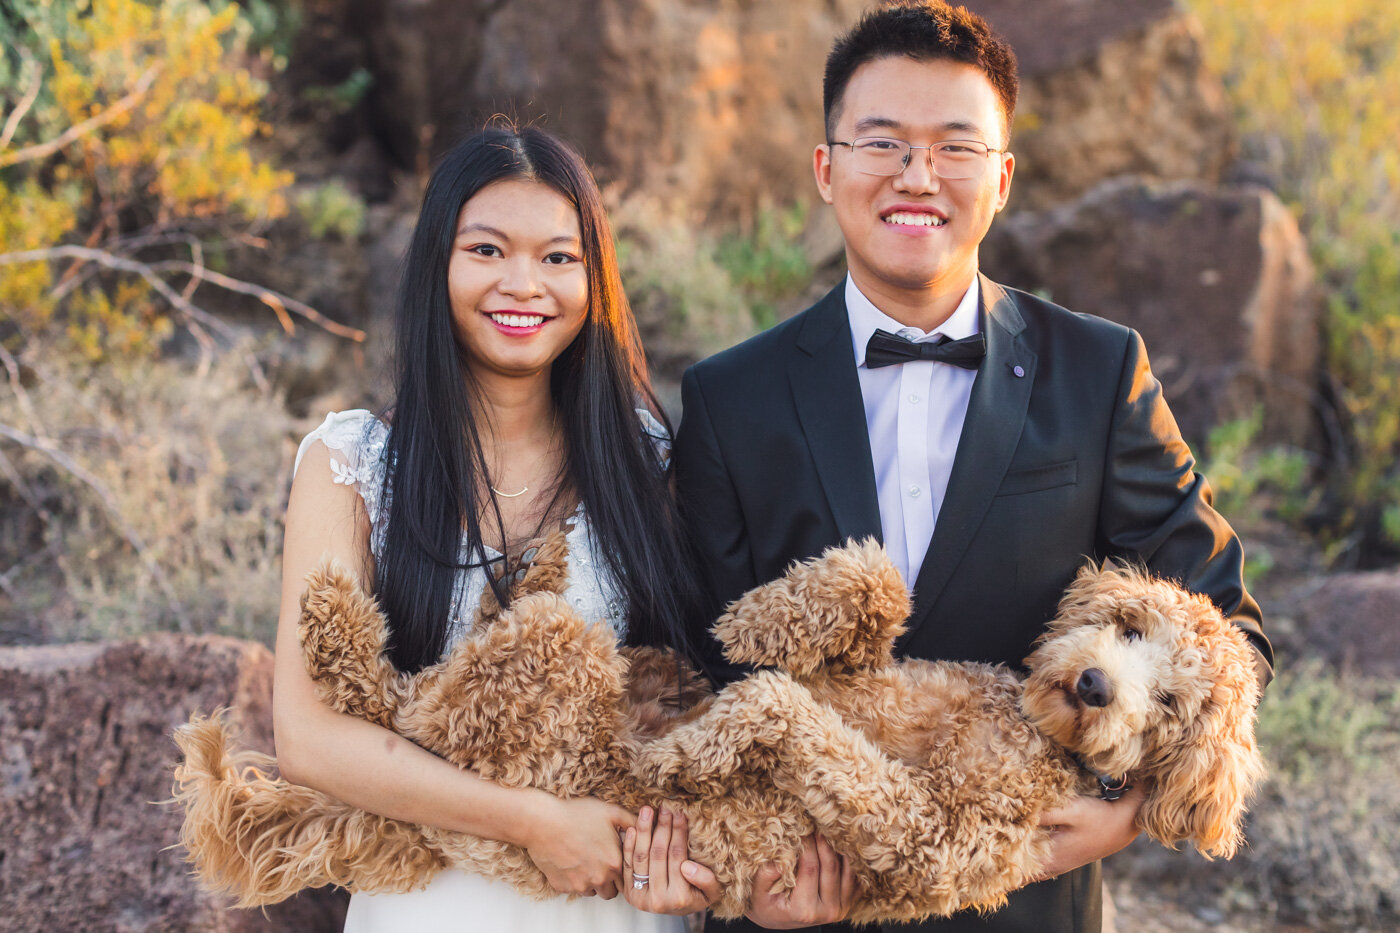 holding-dog-in-wedding-pictures